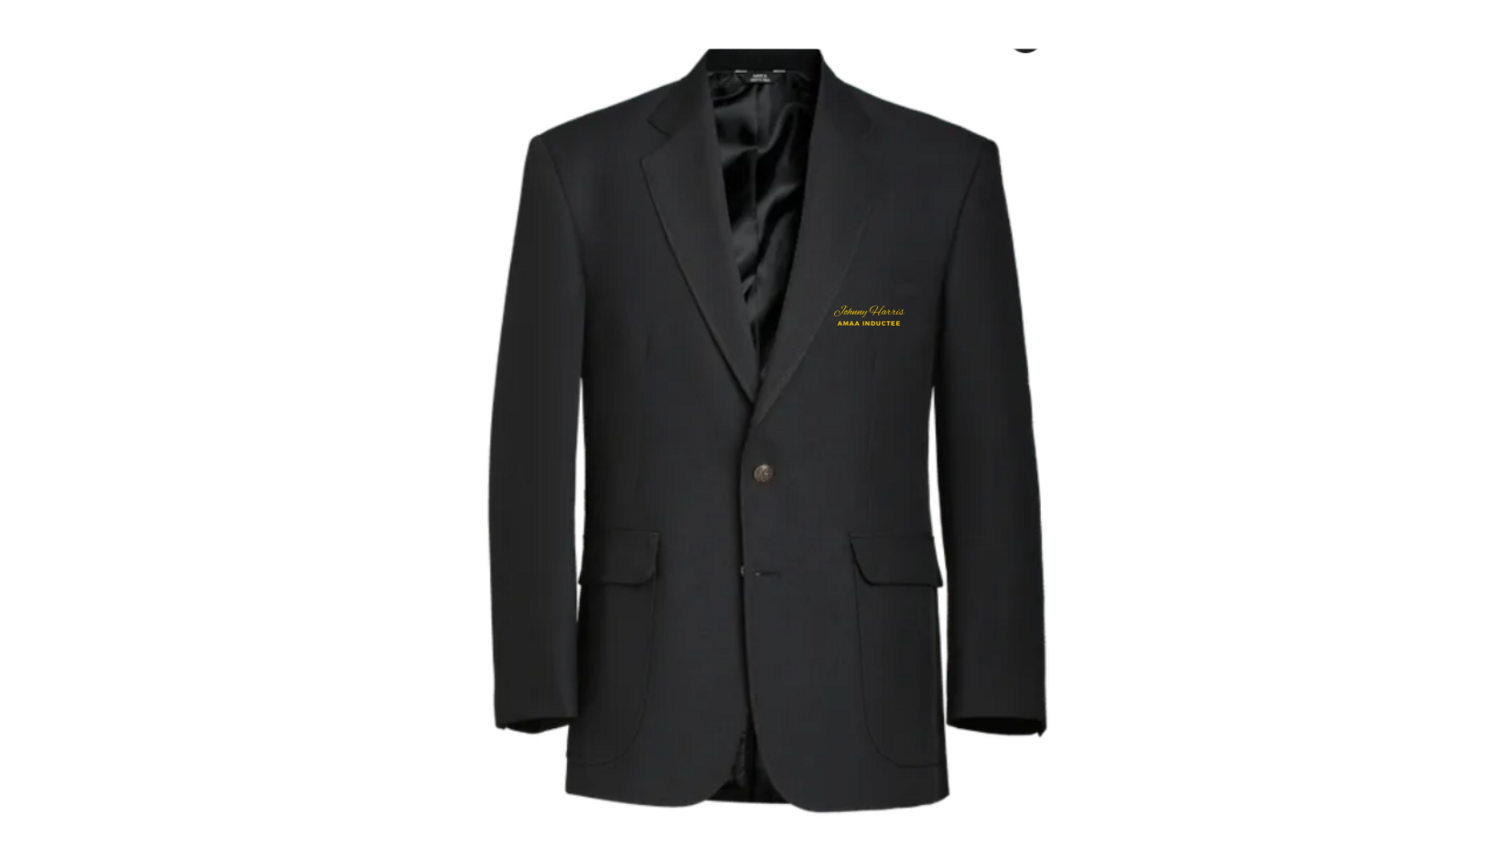 MEN - American Martial Arts Alliance Hall of Honors inductee Blazer (available to AMAA inductees only)